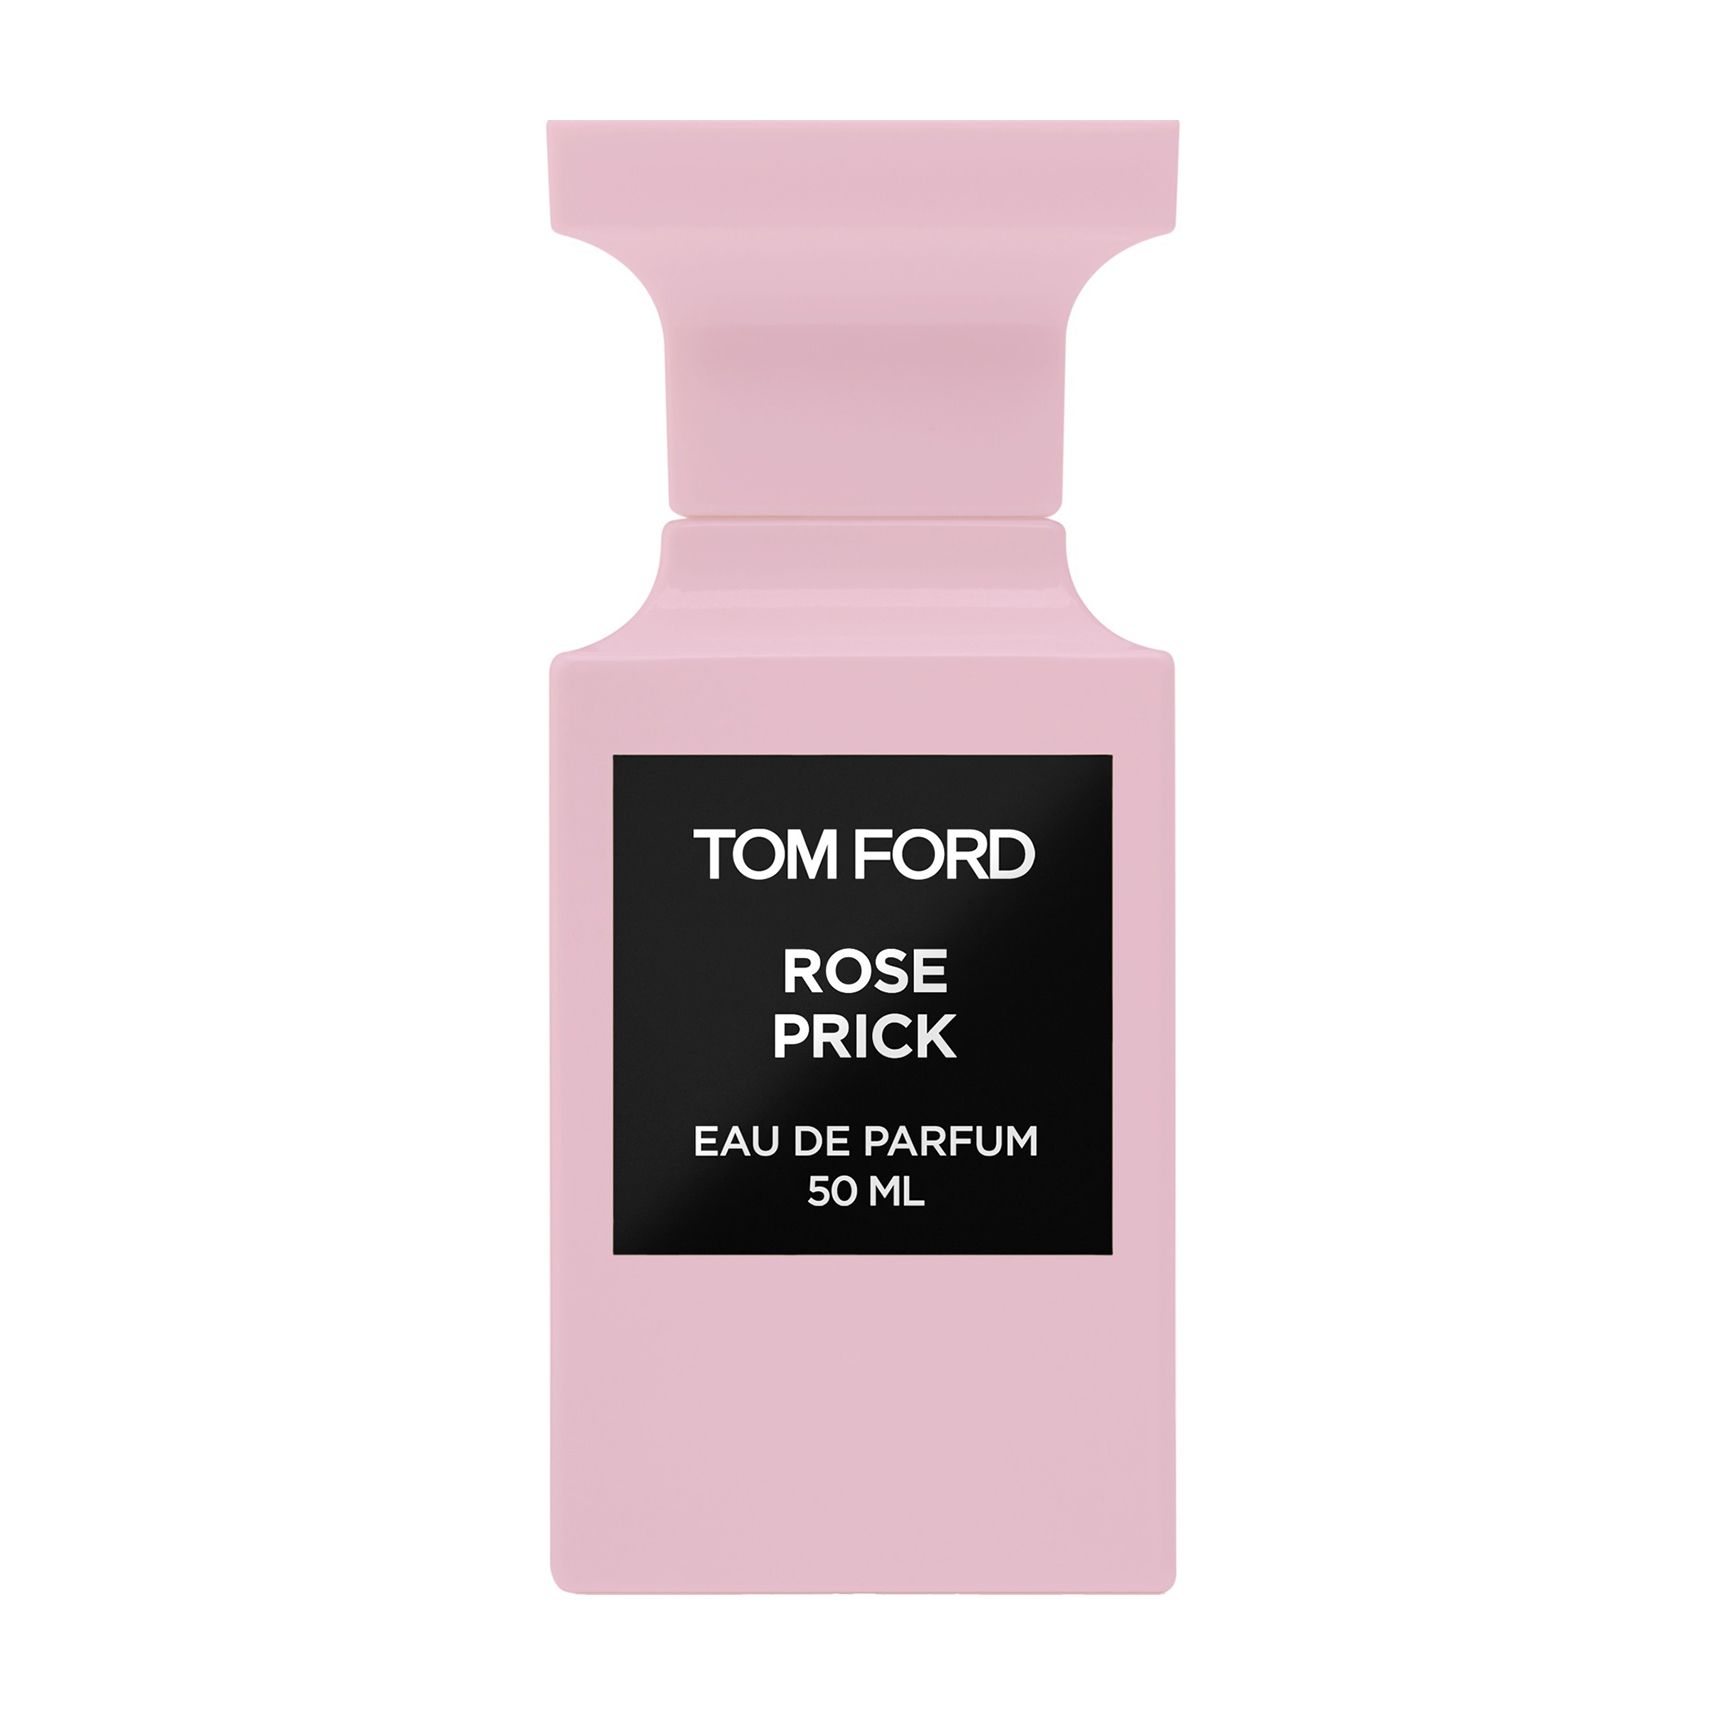 Парфюмерная вода TOM FORD Rose Prick EDP унисекс, 50 мл kigoauto 4b fo38 blade remote key shell 164 r8073 for ford edge escape fusion mustang expedition xlt 2007 2008 2009 2010 2011